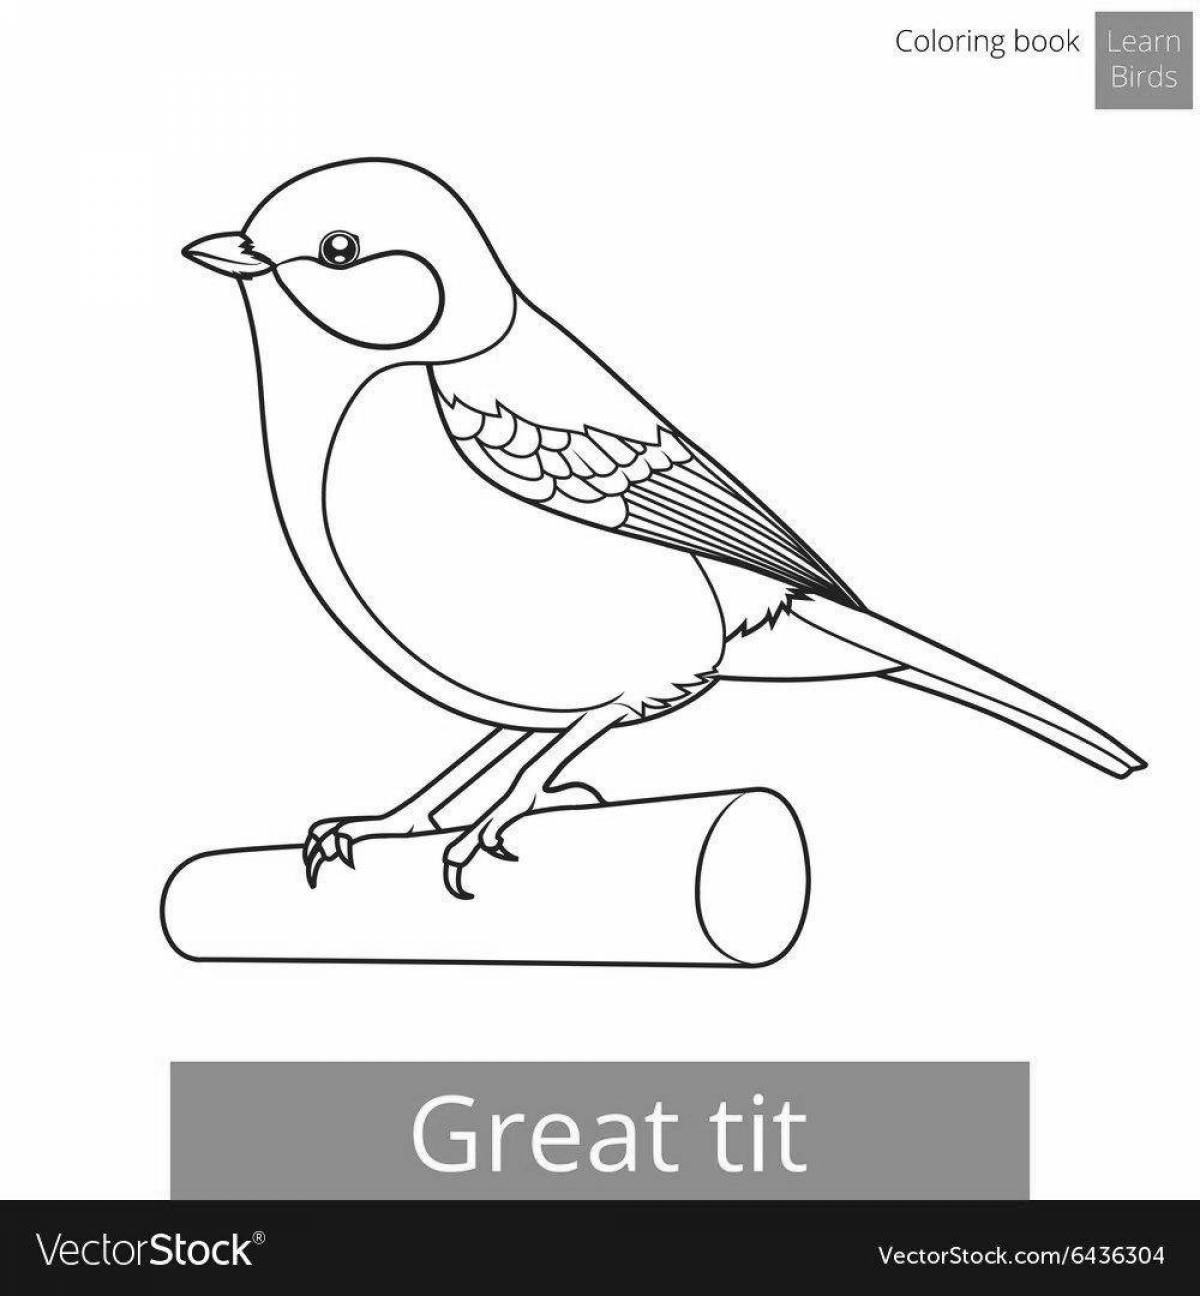 Colorful titmouse coloring book